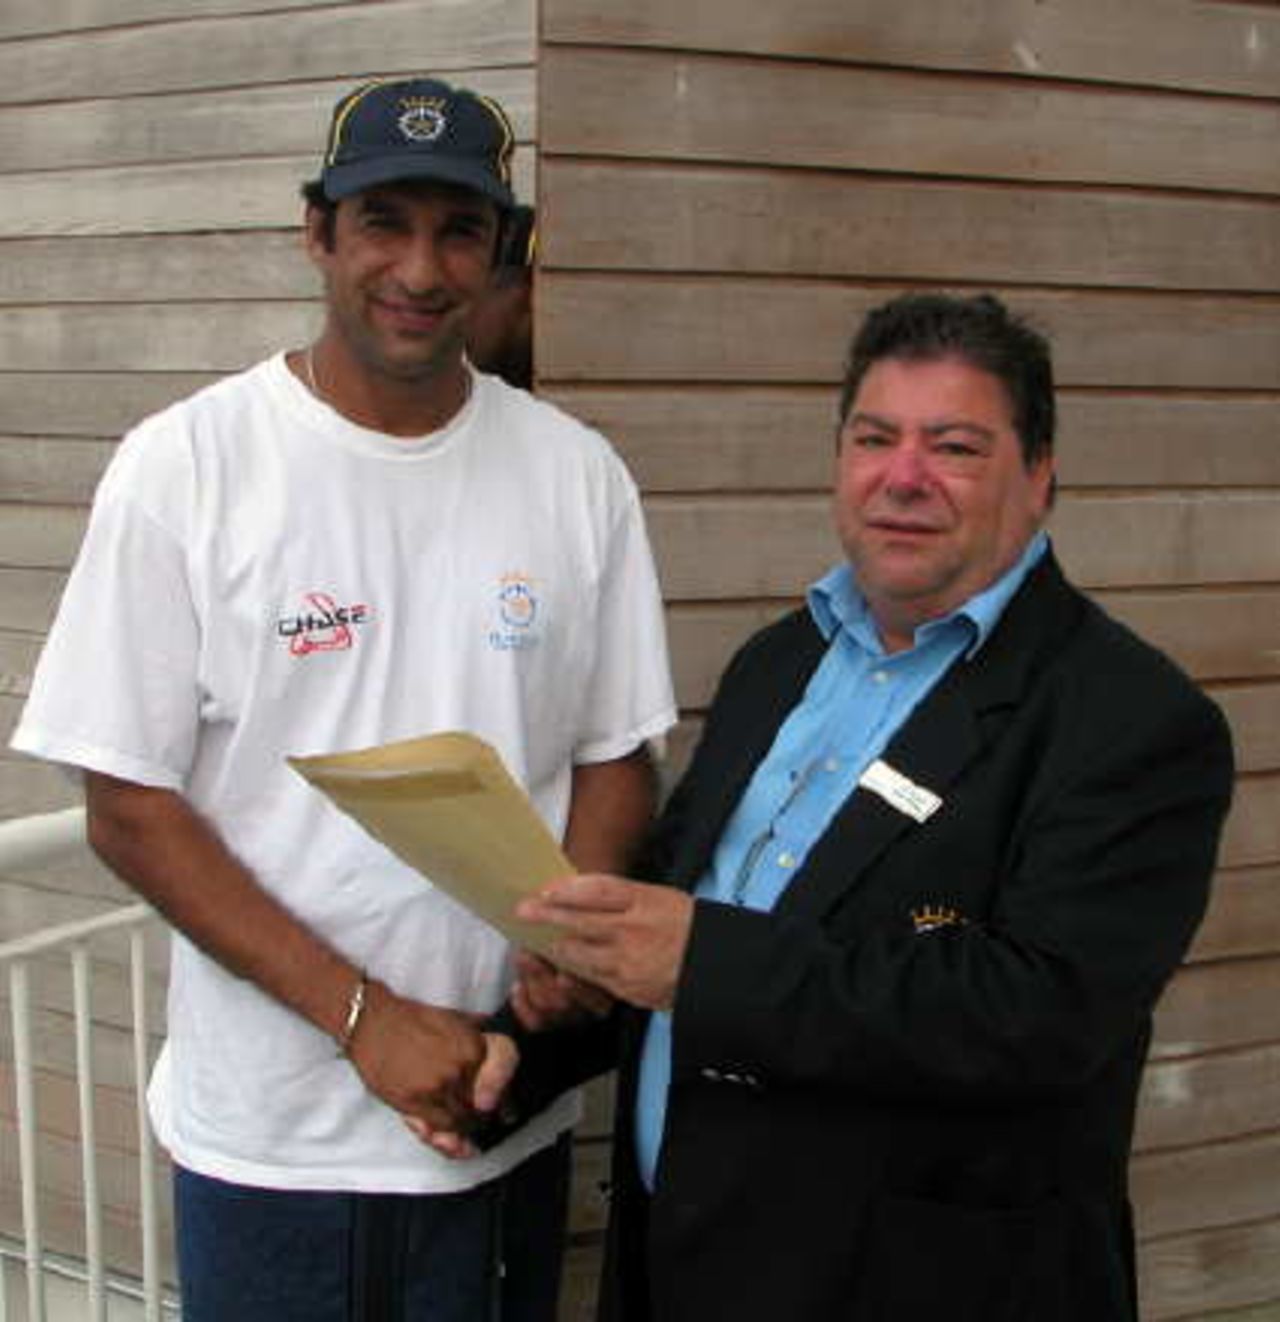 Hampshire Webmaster presents birthday greetings to Wasim Akram from supporters at his Dubail Fan Club